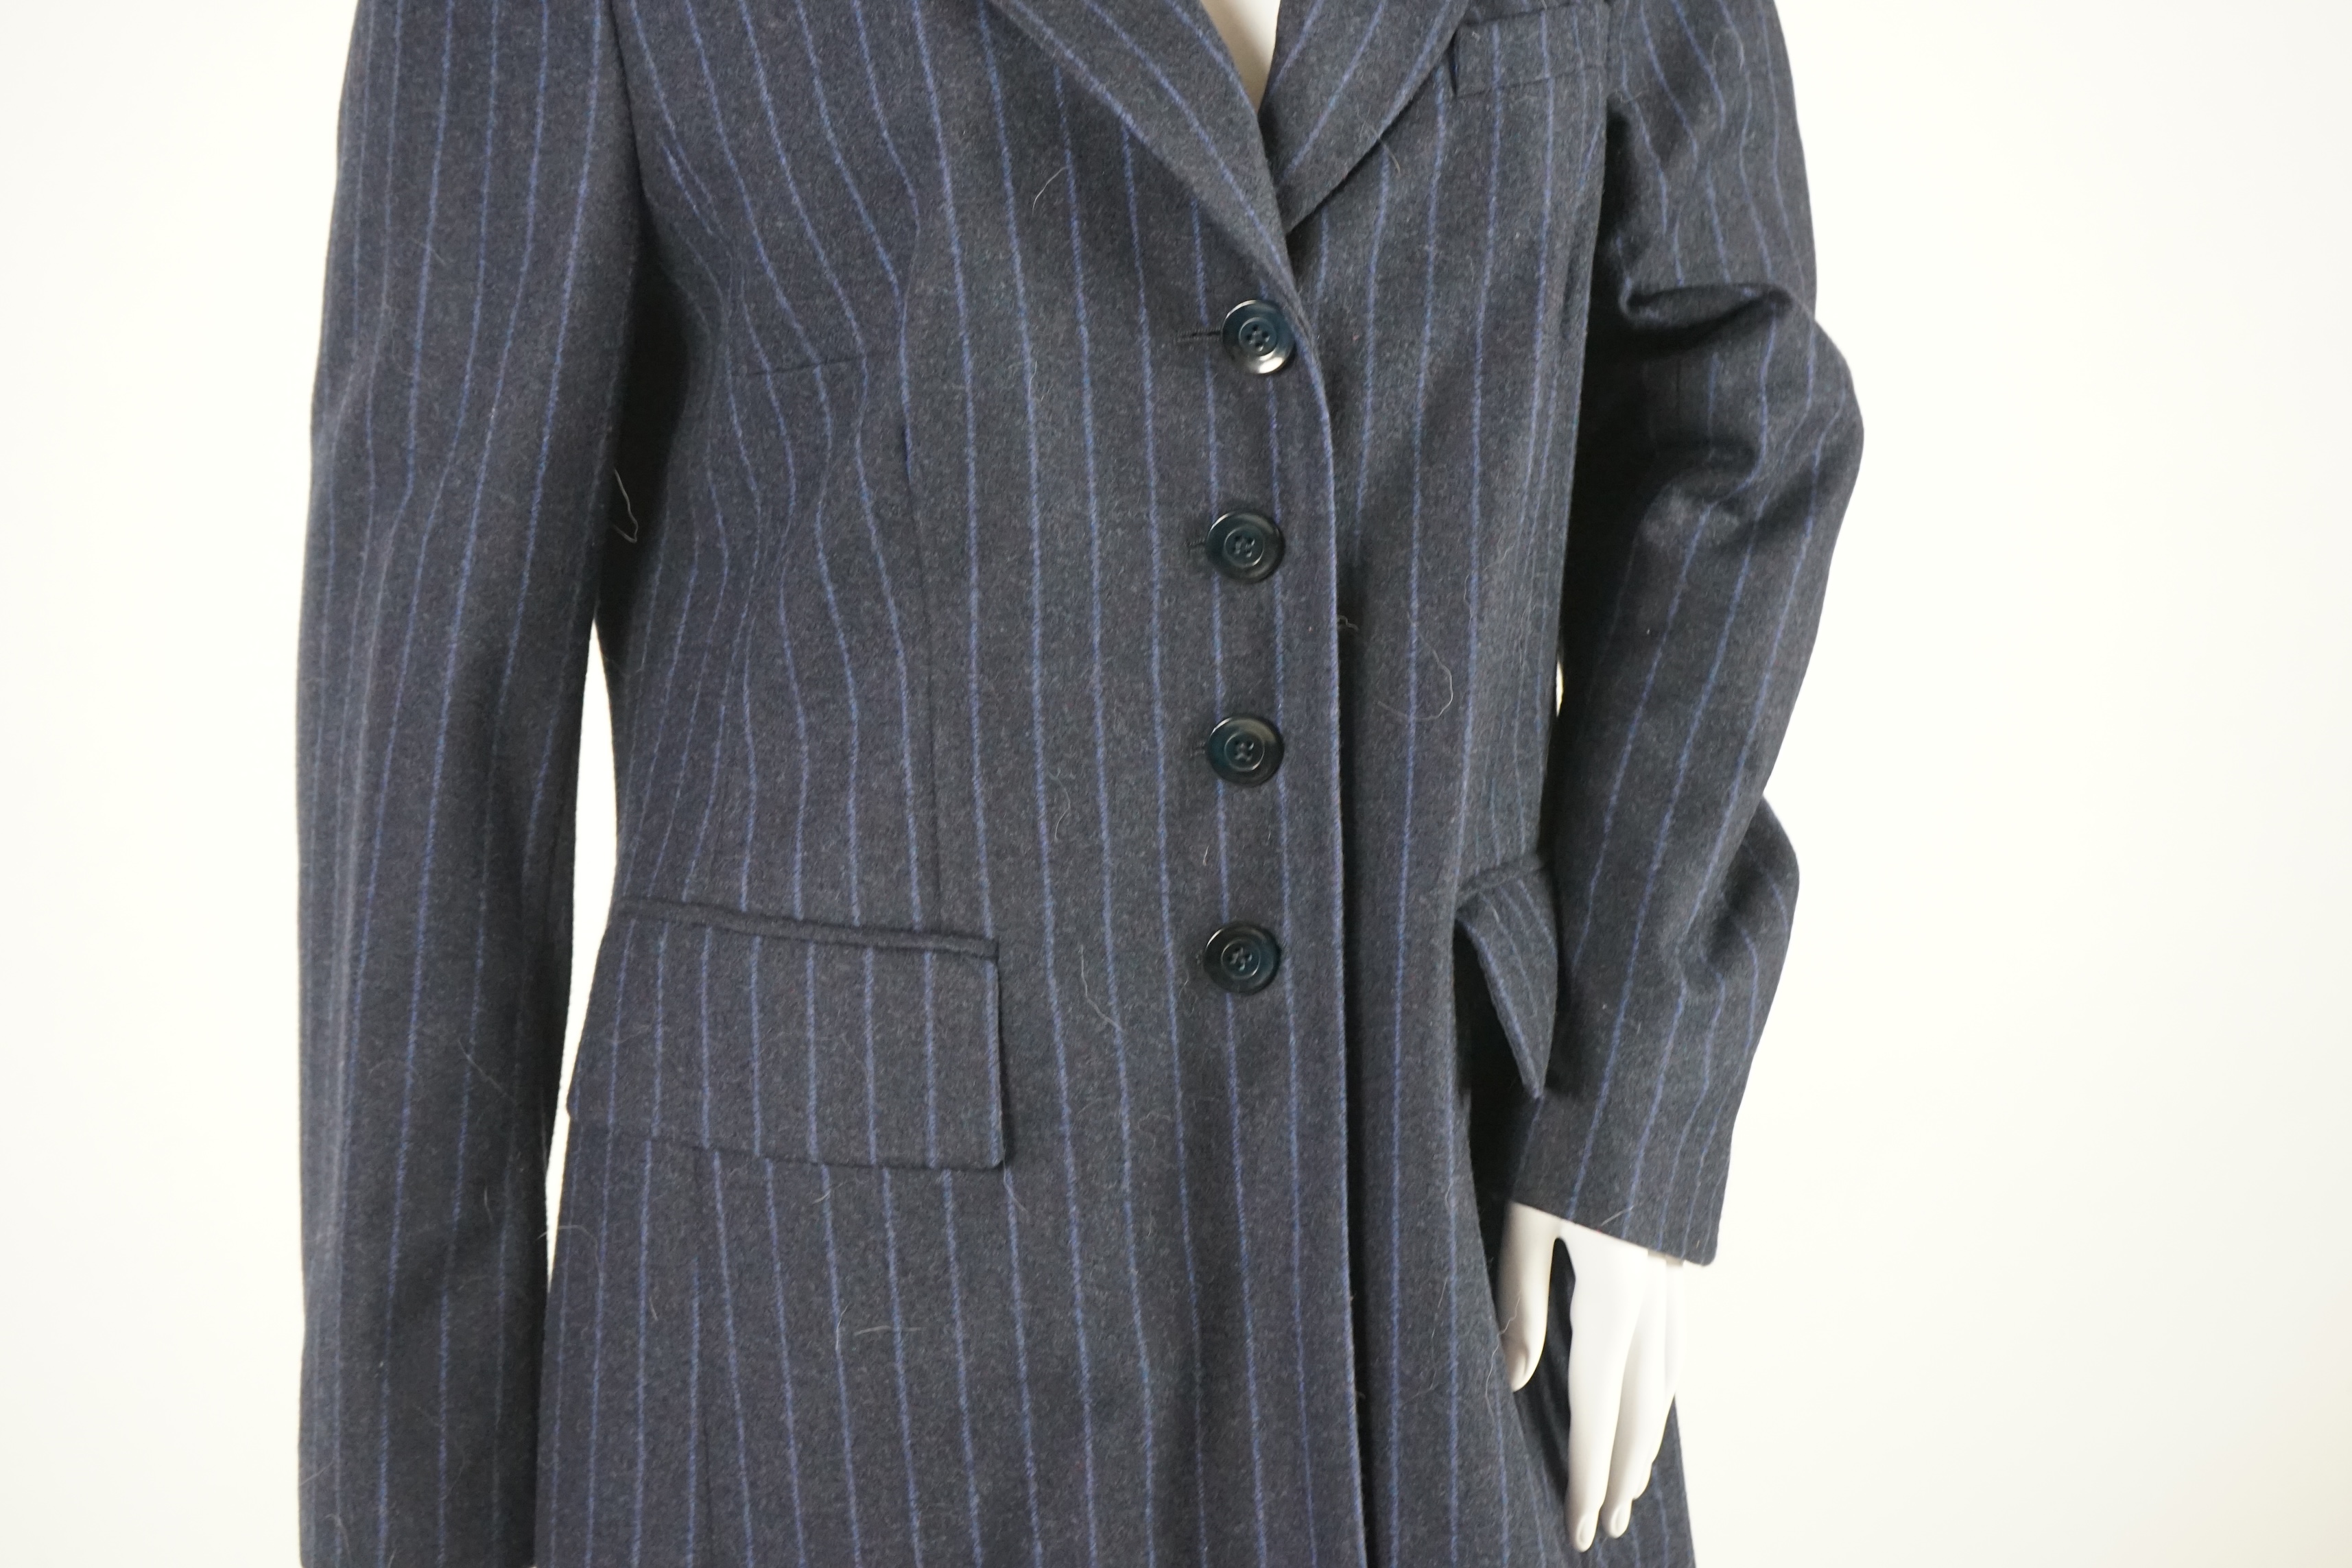 An Elegance lady's trench coat, a velvet jacket and a wool blazer. Approx sizes 14 - 16 Proceeds to Happy Paws Puppy Rescue